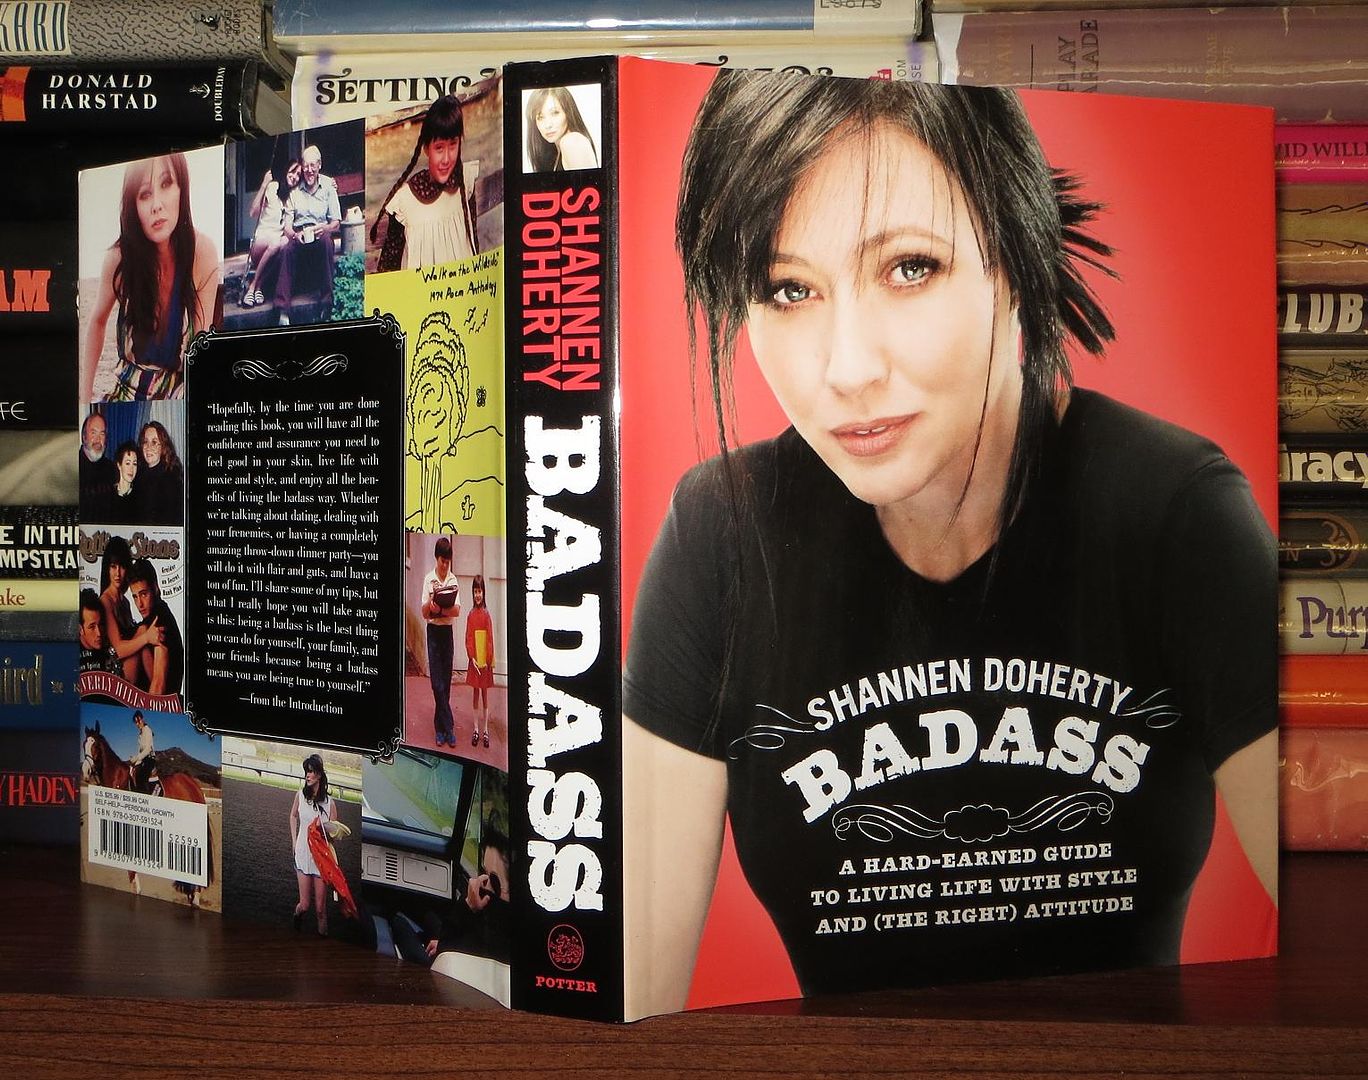 DOHERTY, SHANNEN - Badass a Hard-Earned Guide to Living Life with Style and Attitude